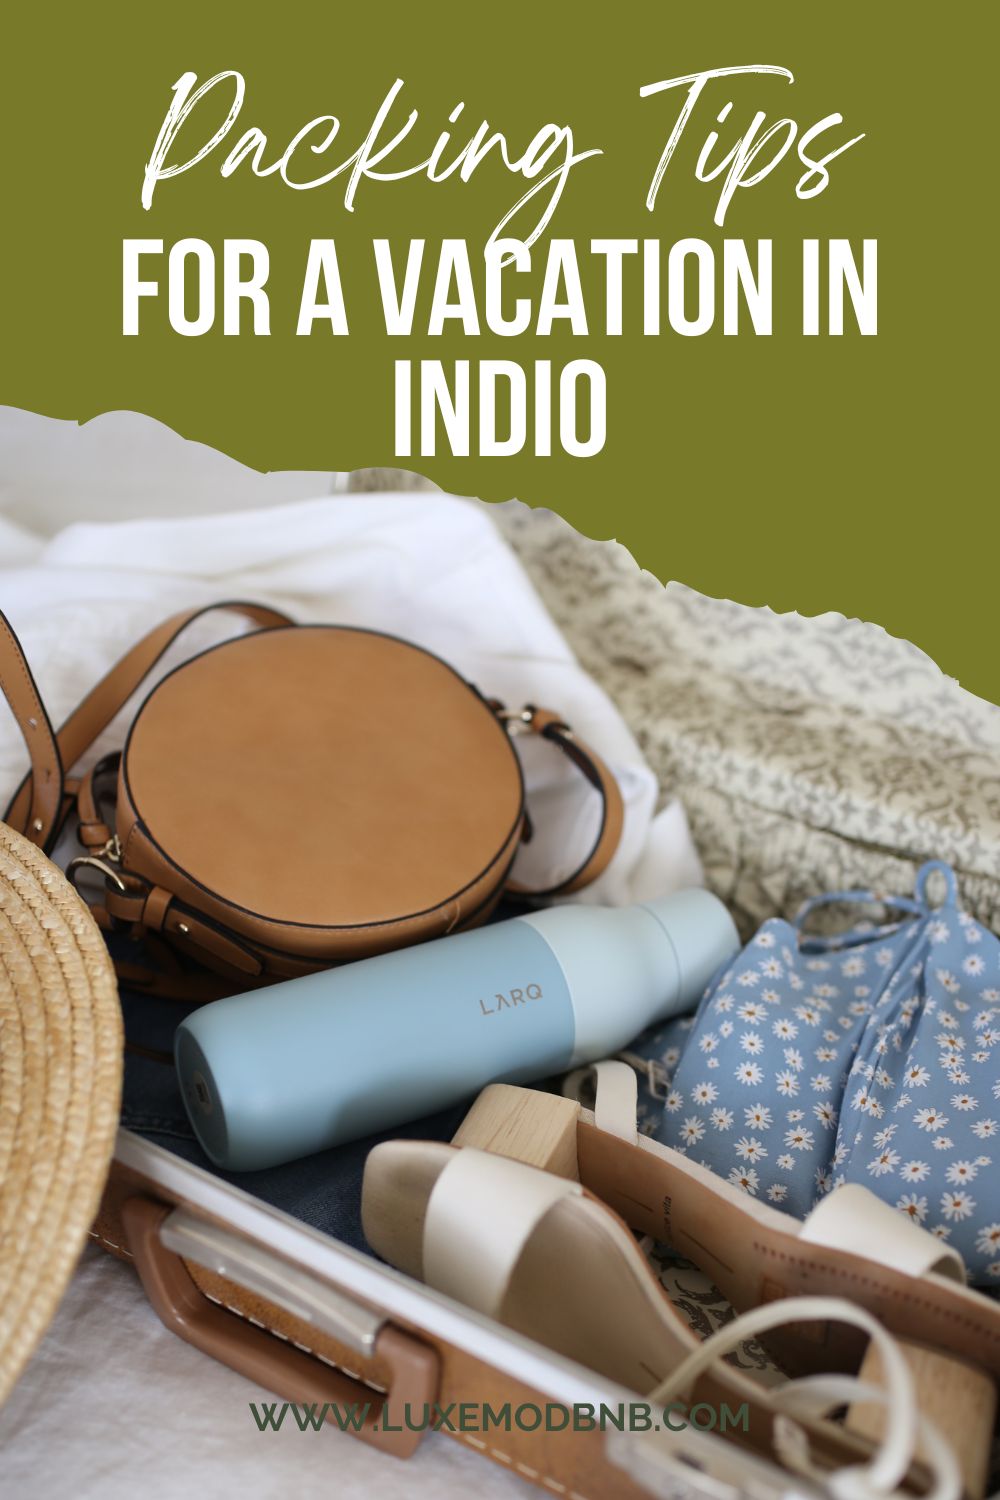 Packing Tips for a Vacation to Indio